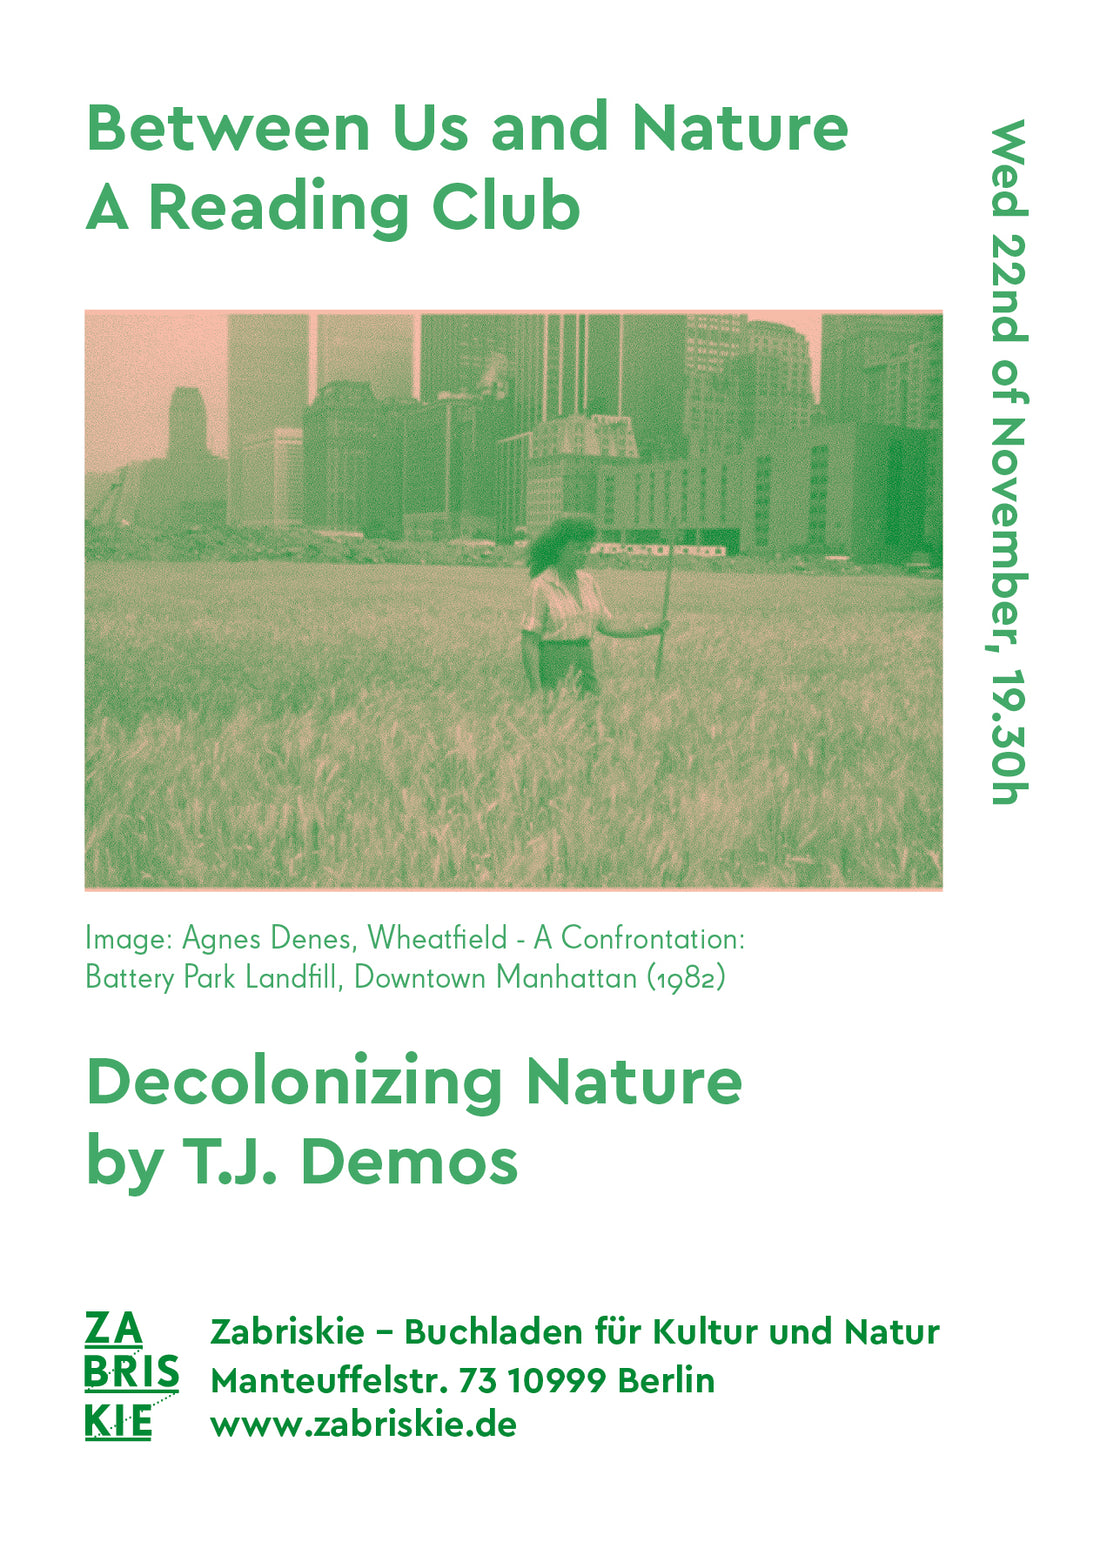 Between Us and Nature – A Reading Club #5: Decolonizing Nature by T.J. Demos